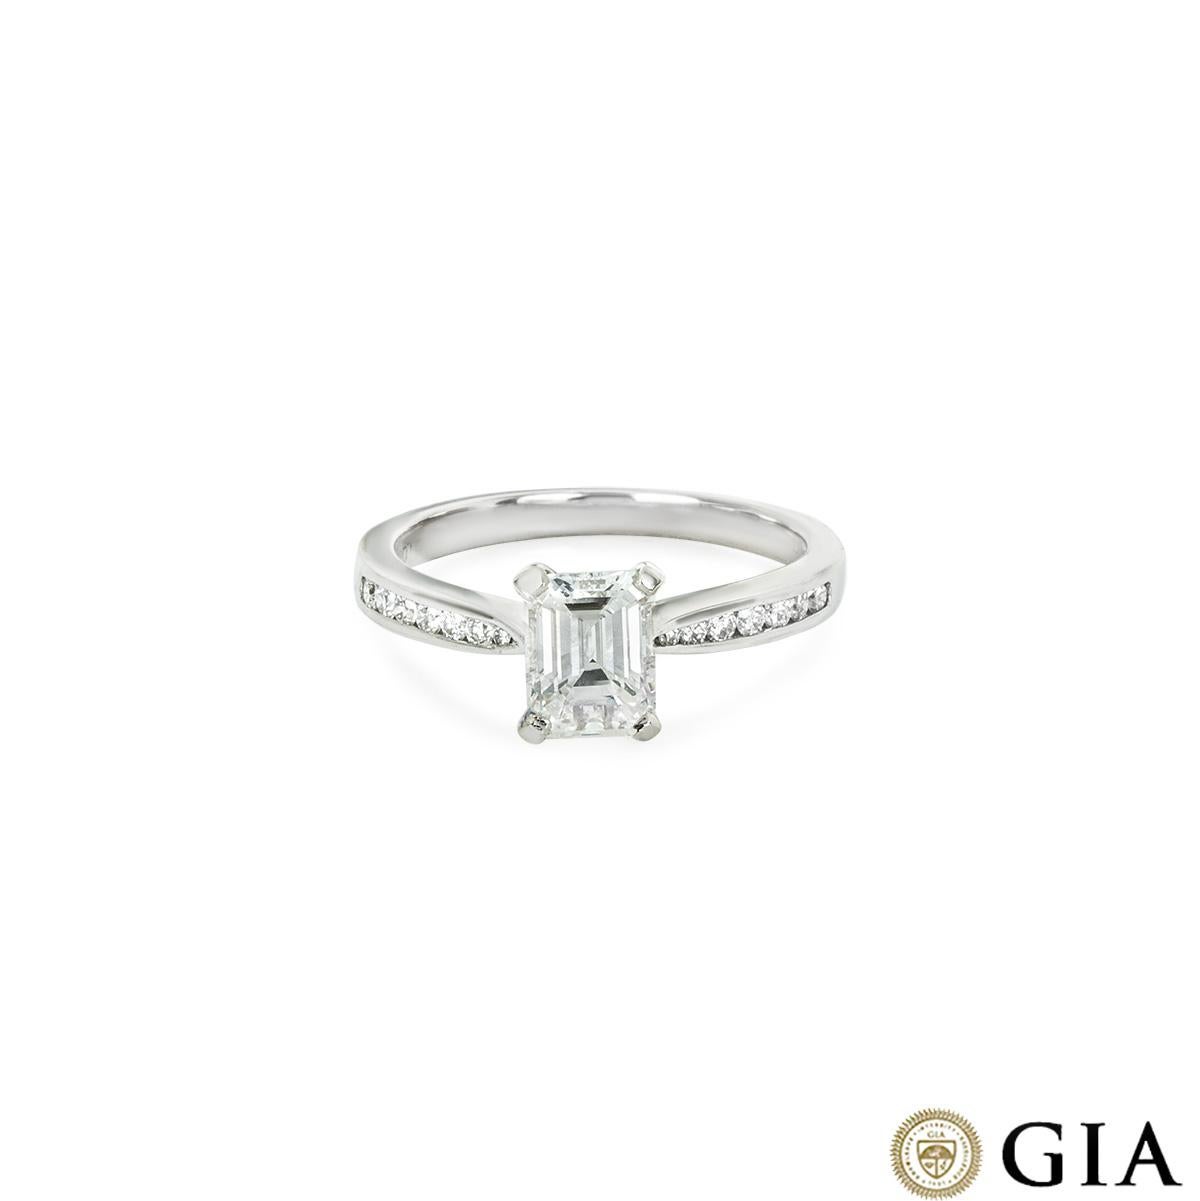 GIA Certified White Gold Emerald Cut Diamond Engagement Ring 0.95ct D/VS1 In Excellent Condition For Sale In London, GB